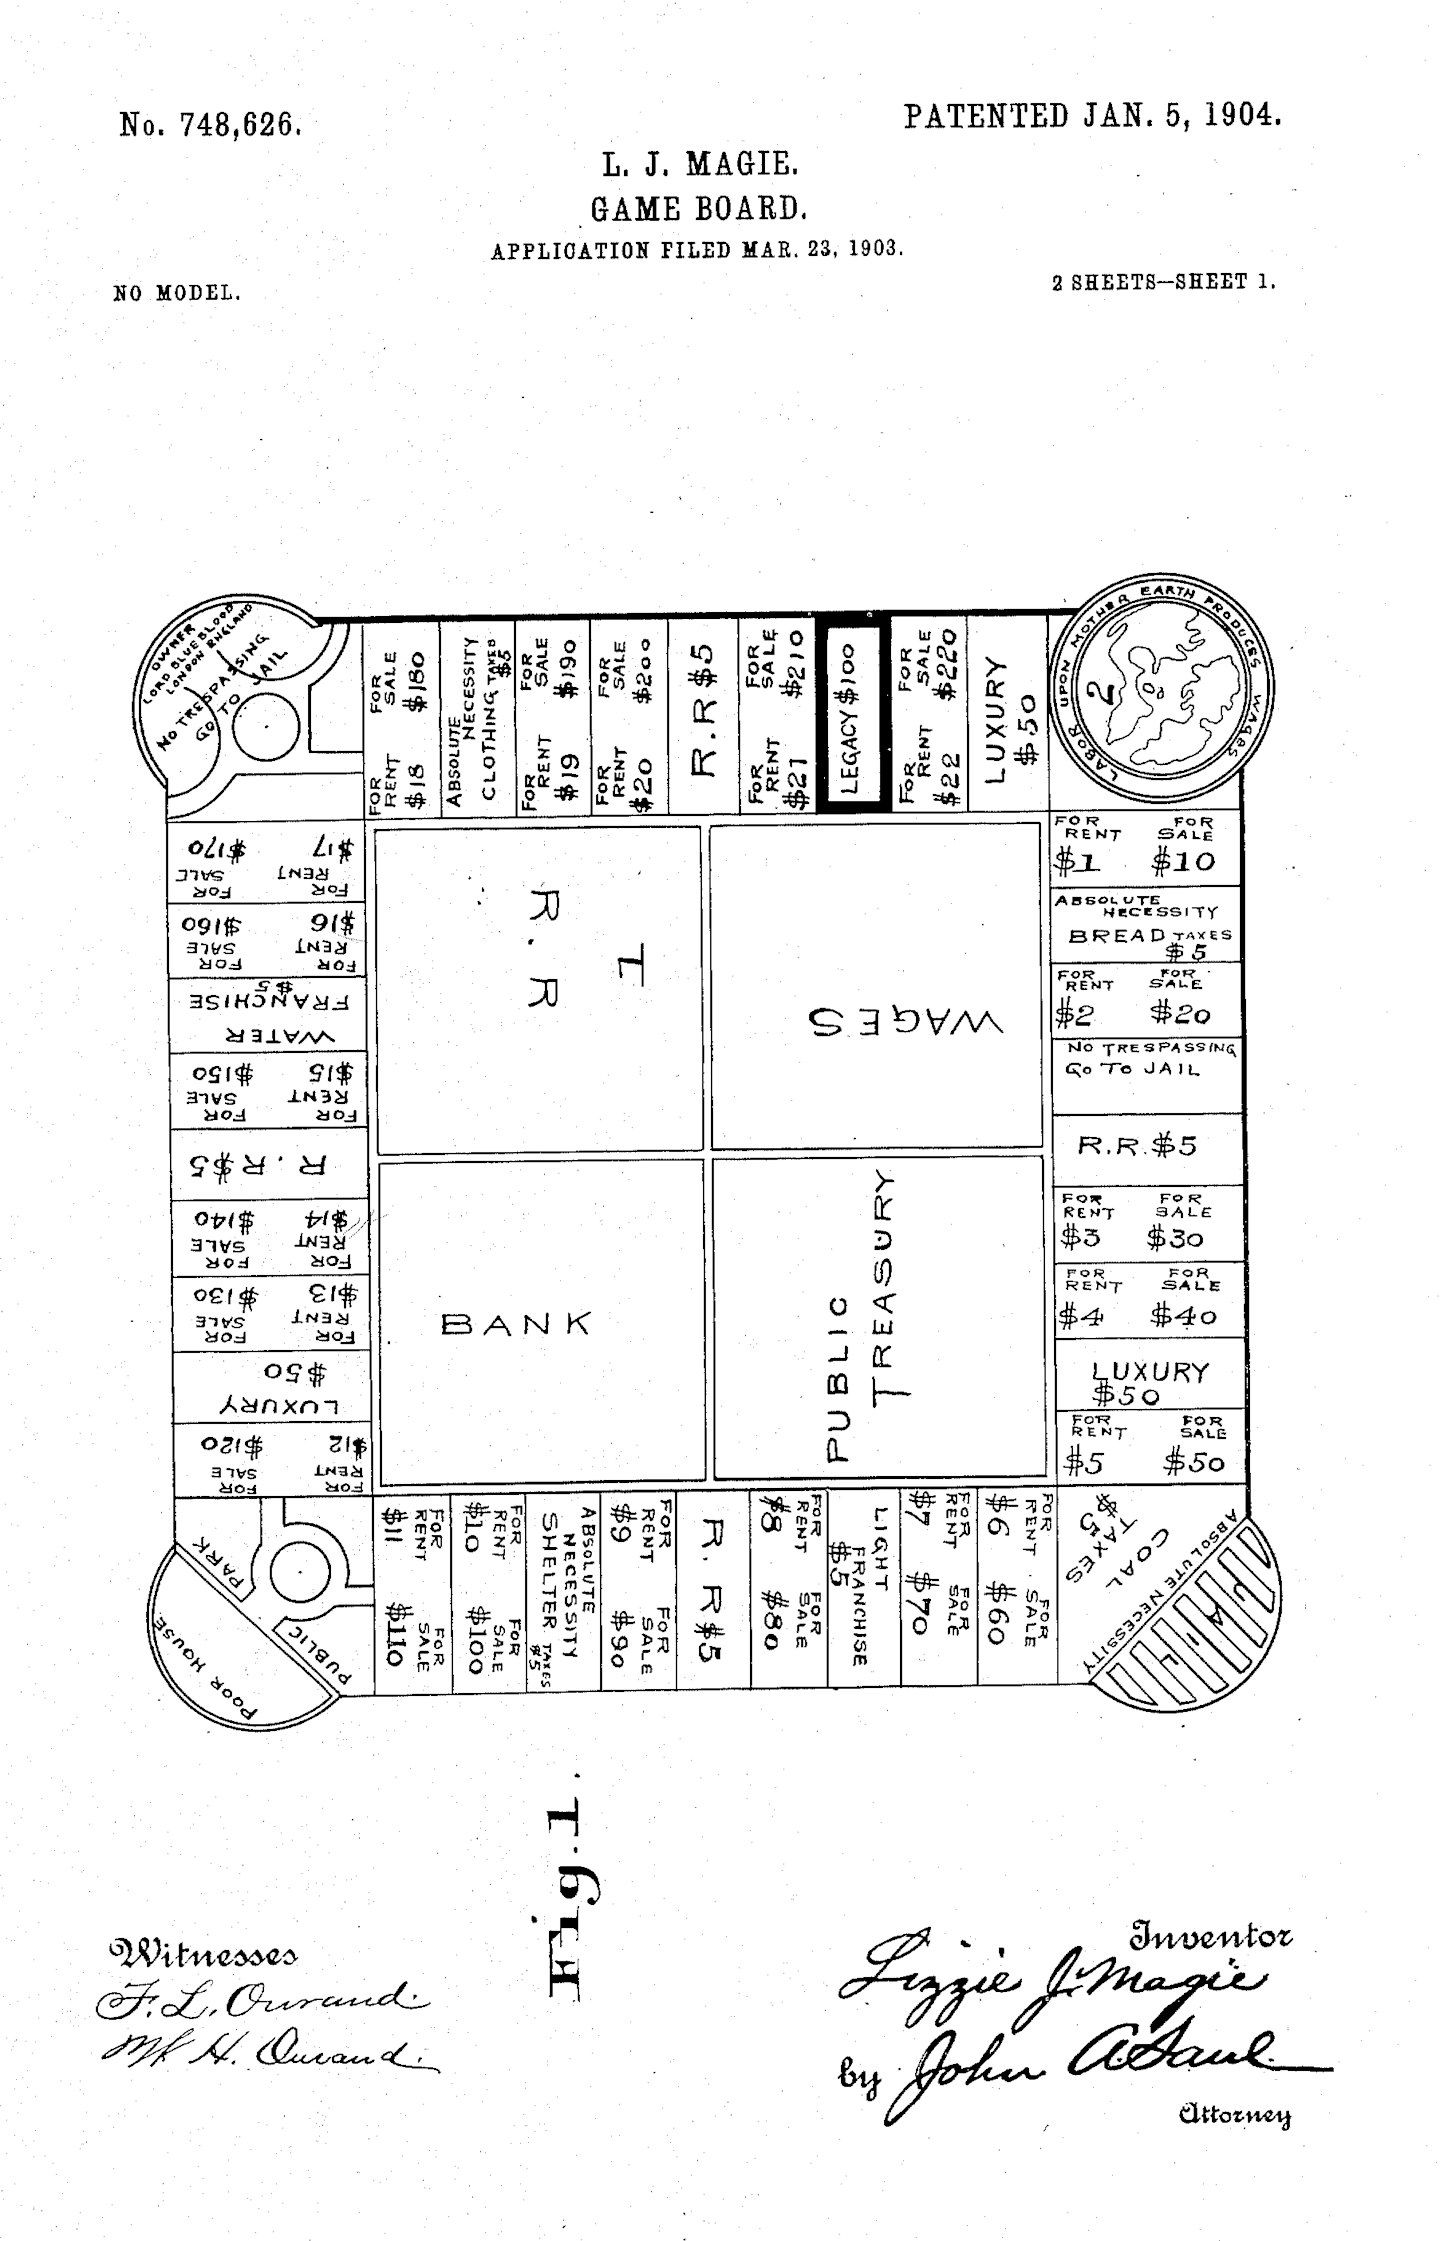 Lizzie Magie’s patent for the Landlord's Game, forerunner to Monopoly